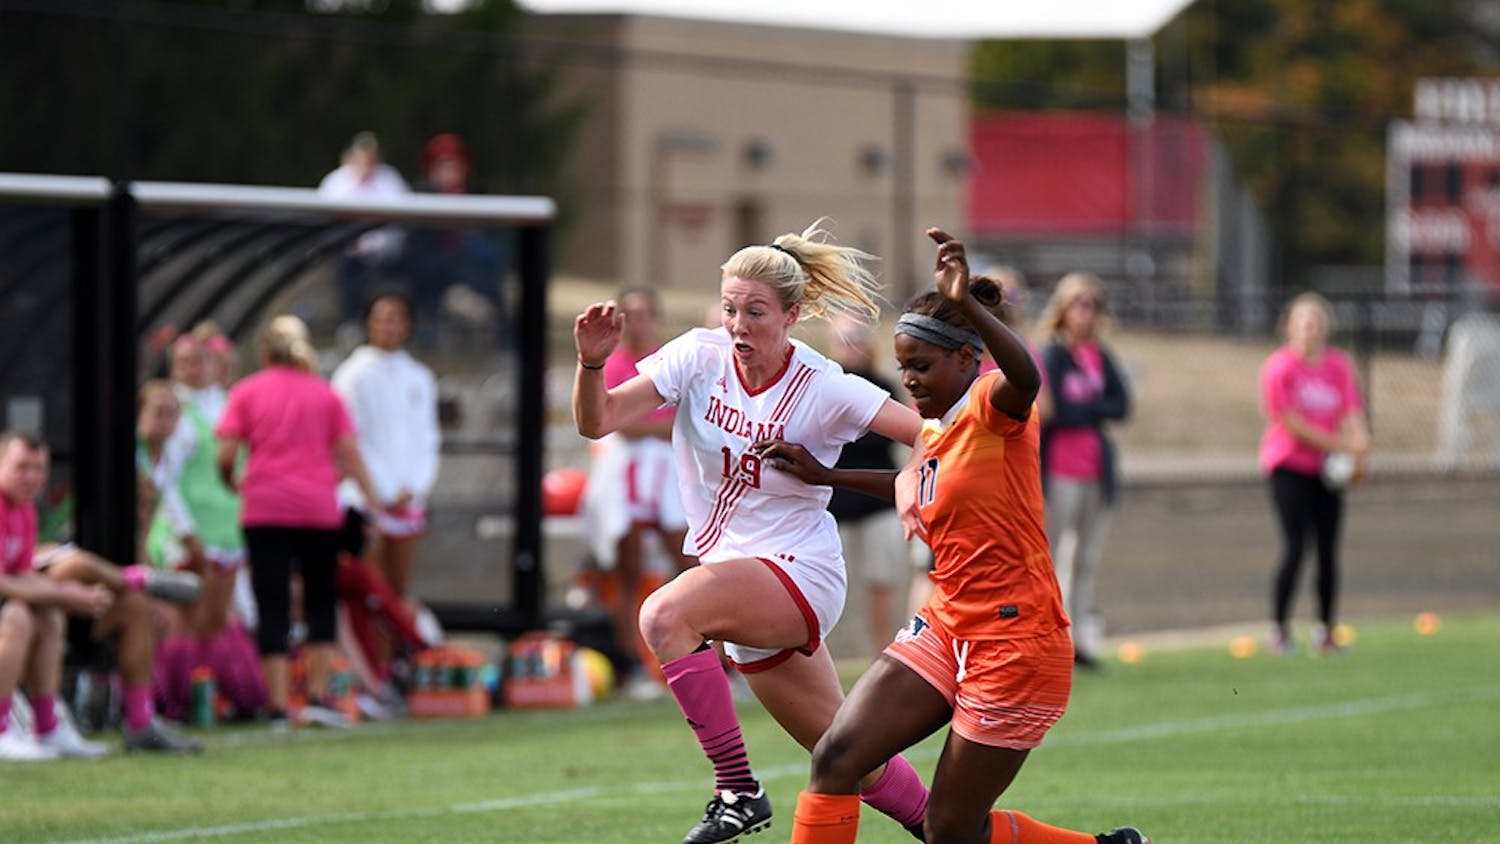 Sophomore midfielder Chandra Davidson chases down the ball against Illinois on Oct. 1 at Bill Armstrong Stadium. Davidson recorded six goals and two assists for IU women's soccer this season.